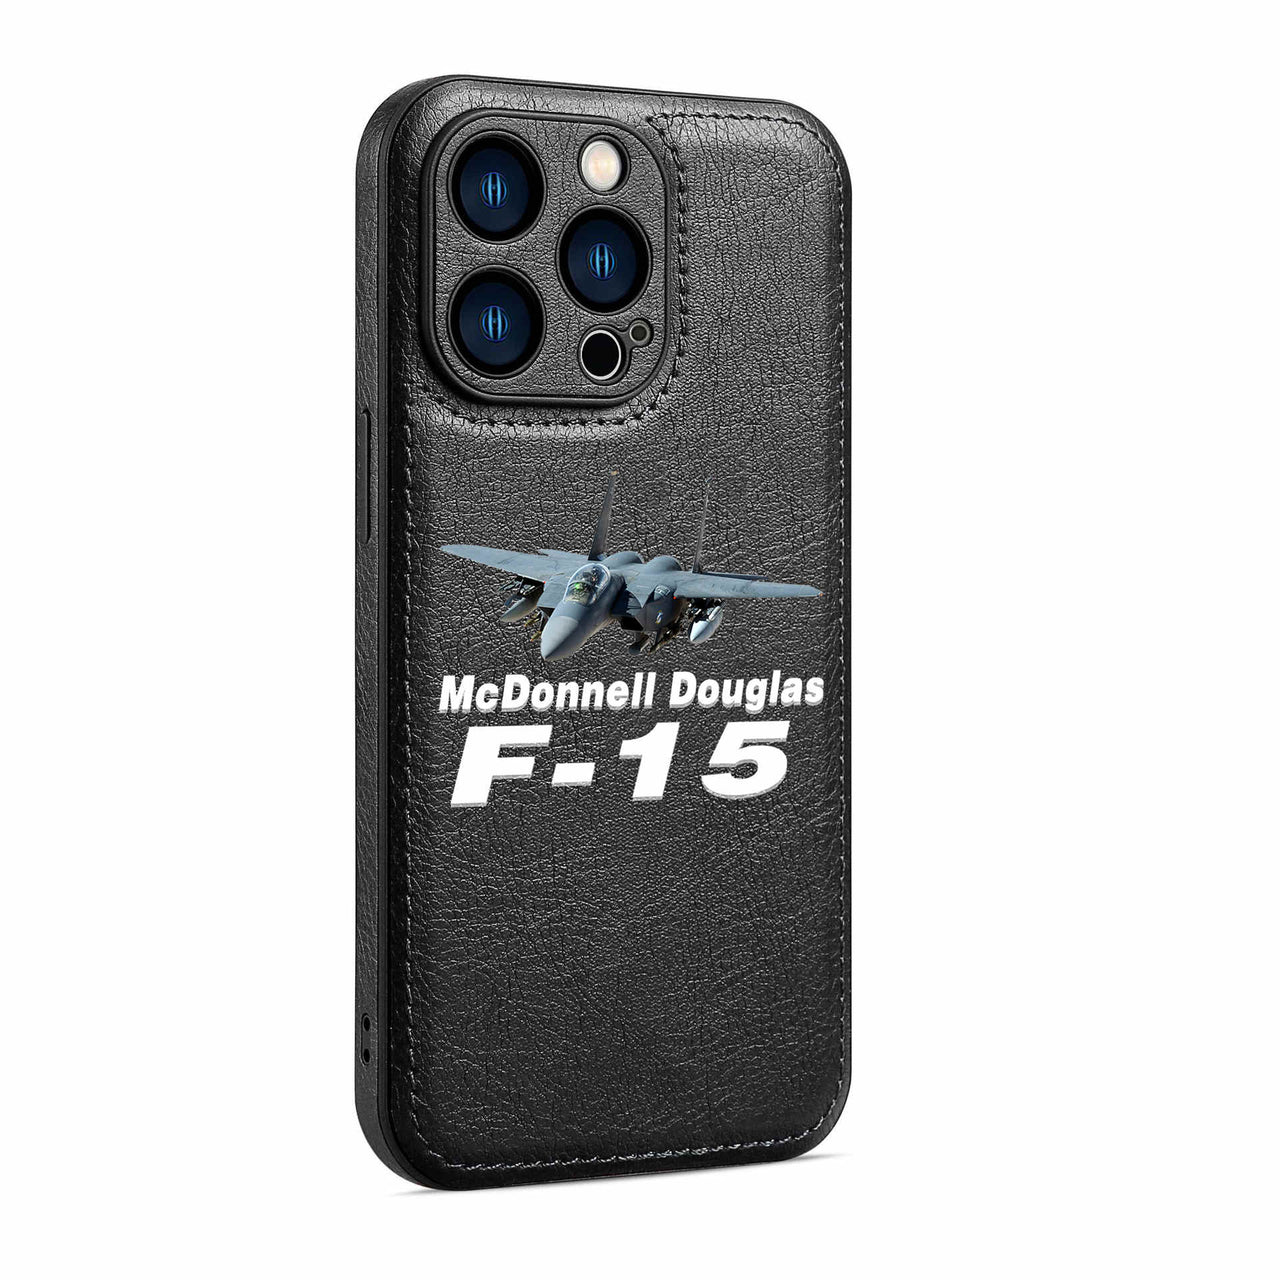 The McDonnell Douglas F15 Designed Leather iPhone Cases